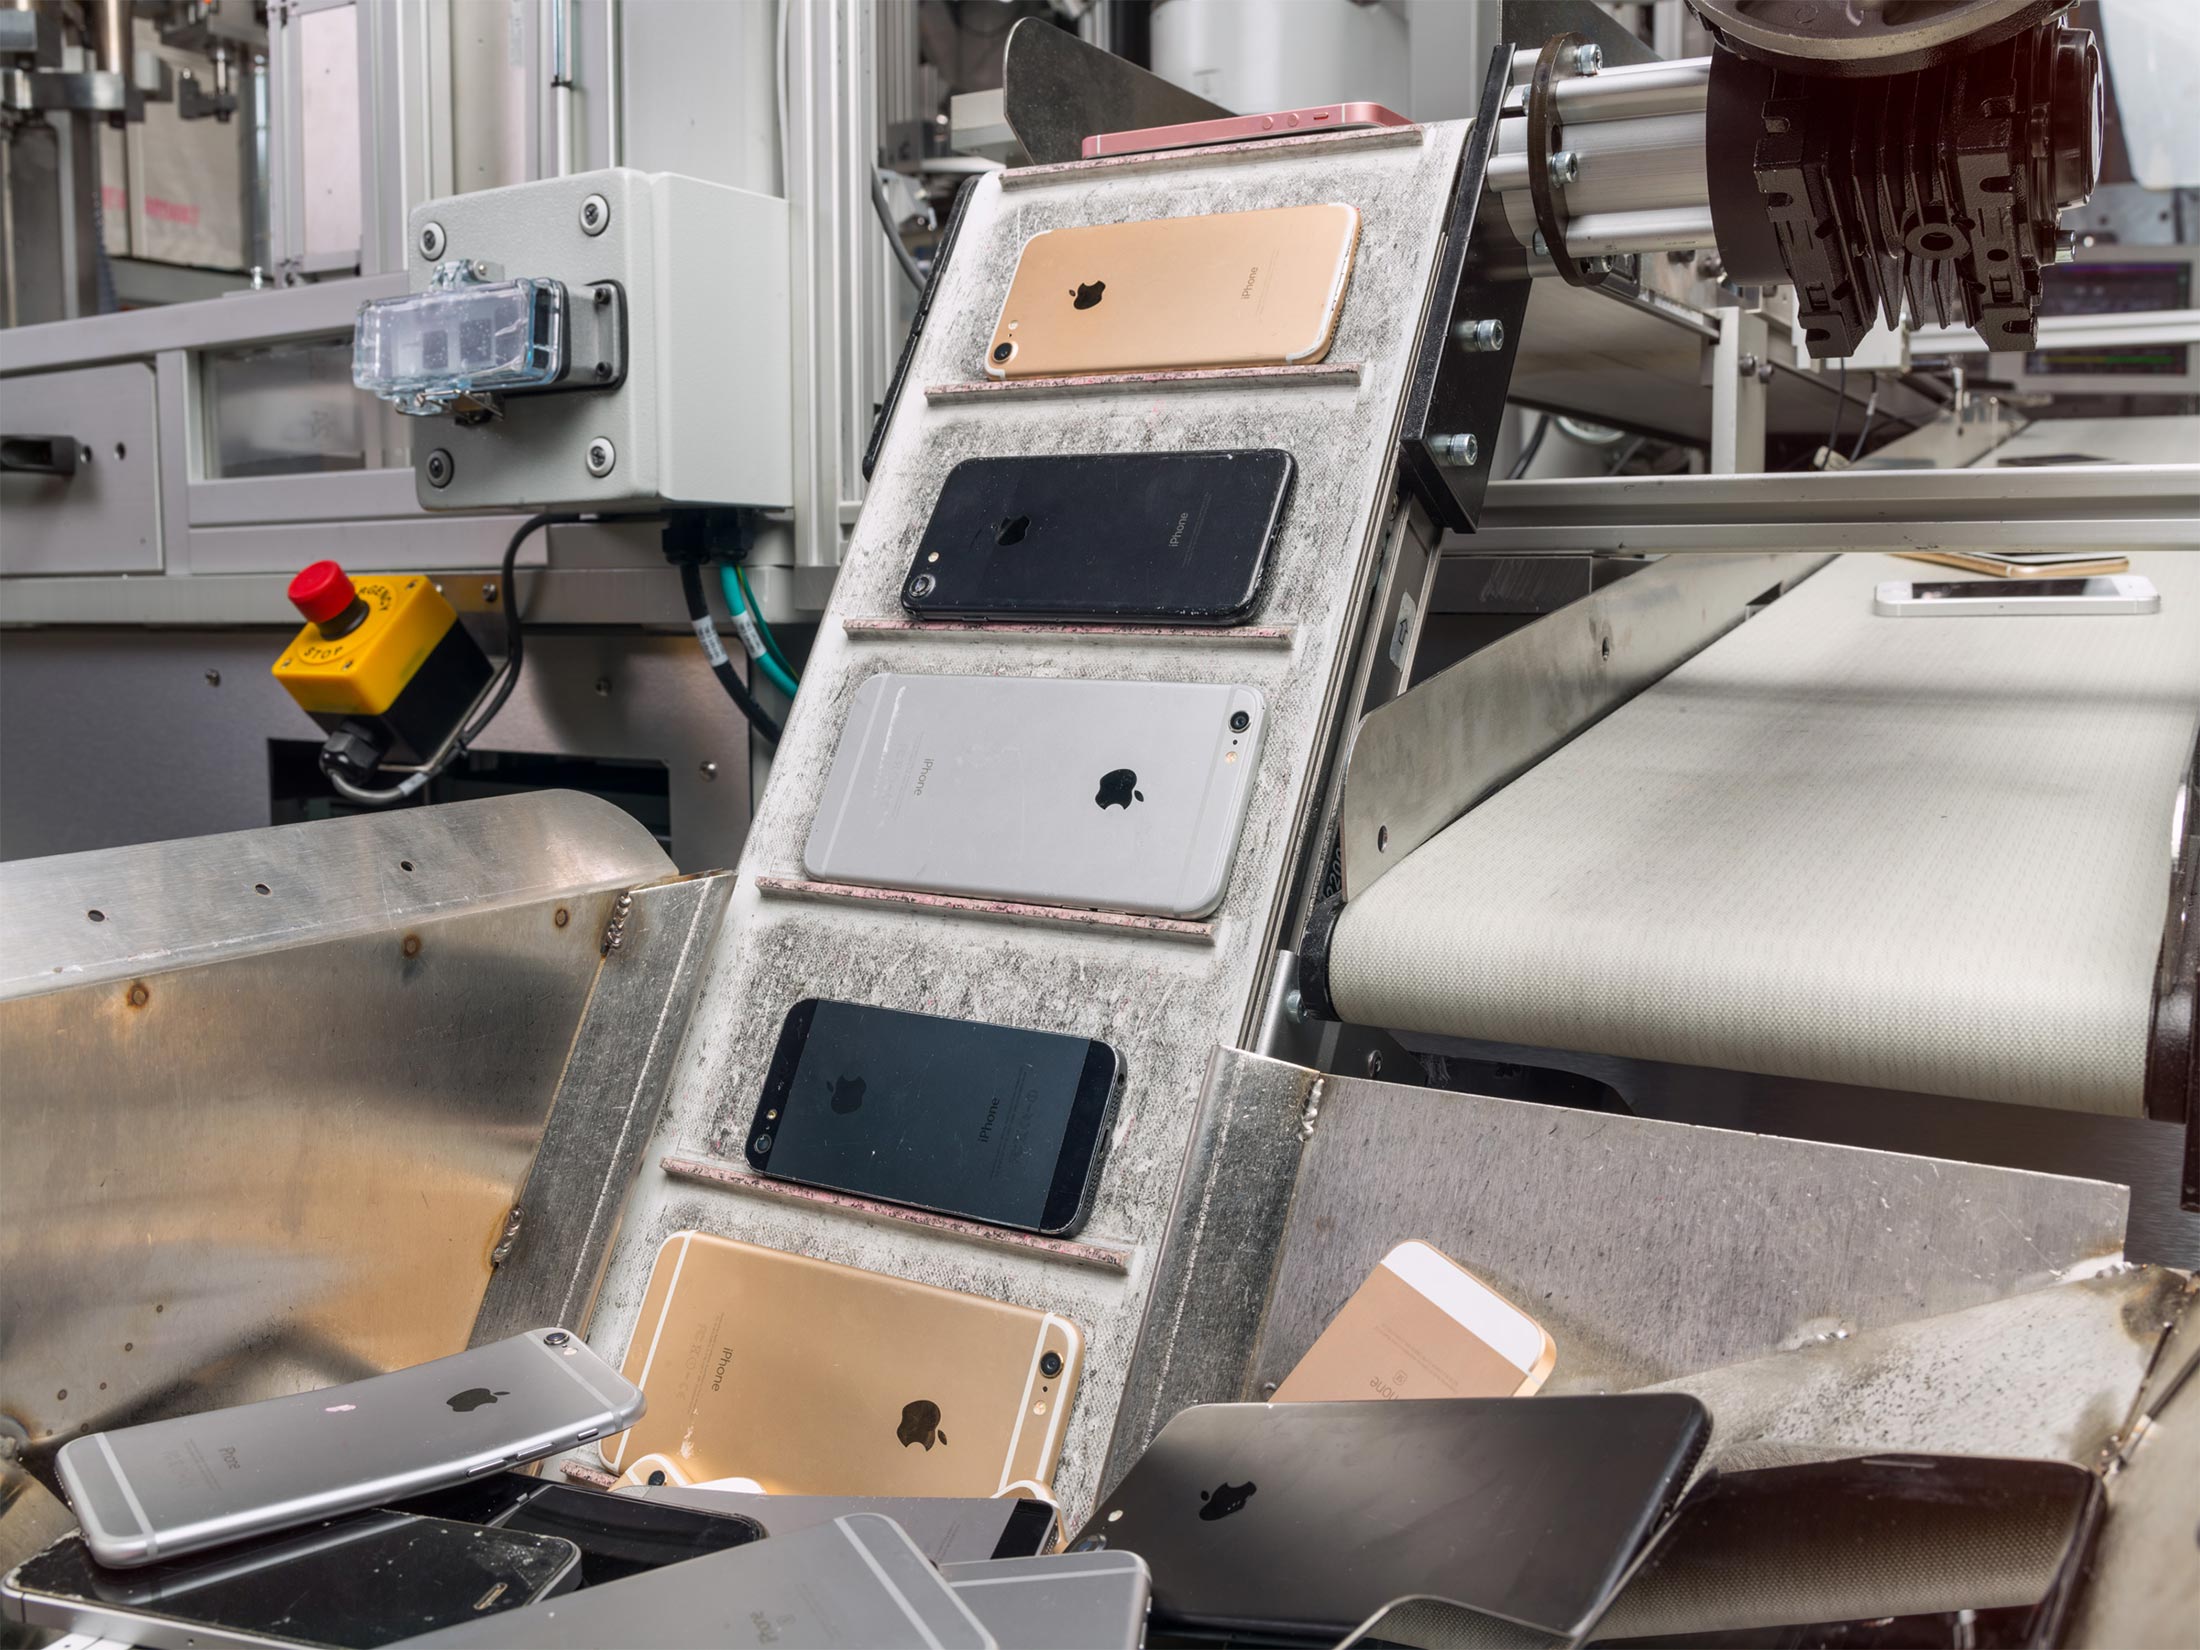 IPhone ladder on Apple’s Daisy recycling robot.